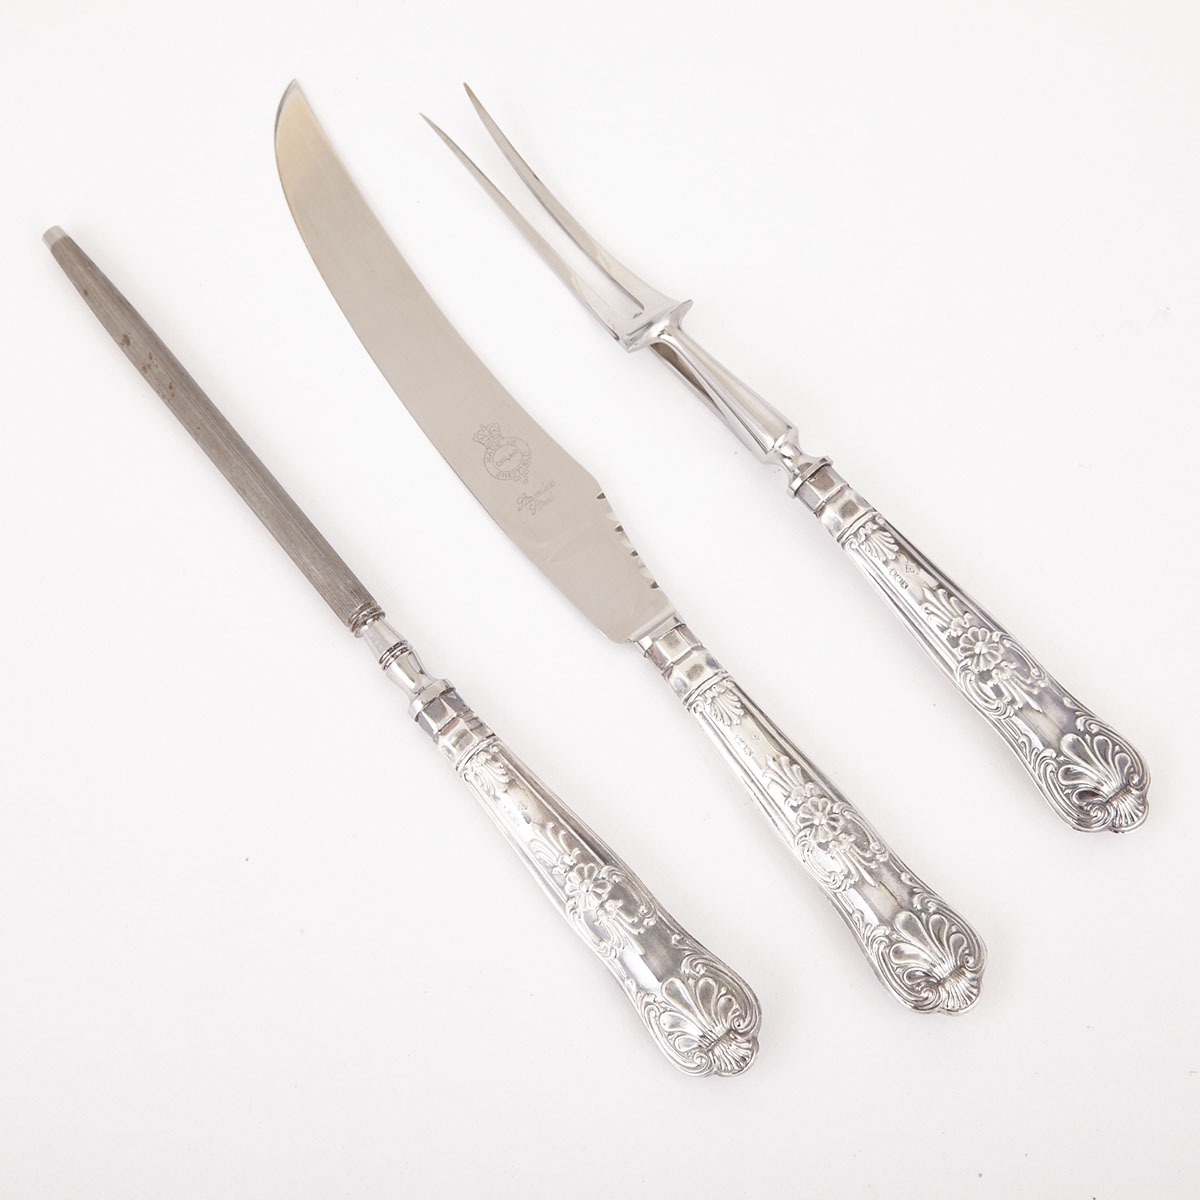 English Silver Queen’s Pattern Carving Set, probably Harrison Brothers or Henry Birks, Sheffield, 1940